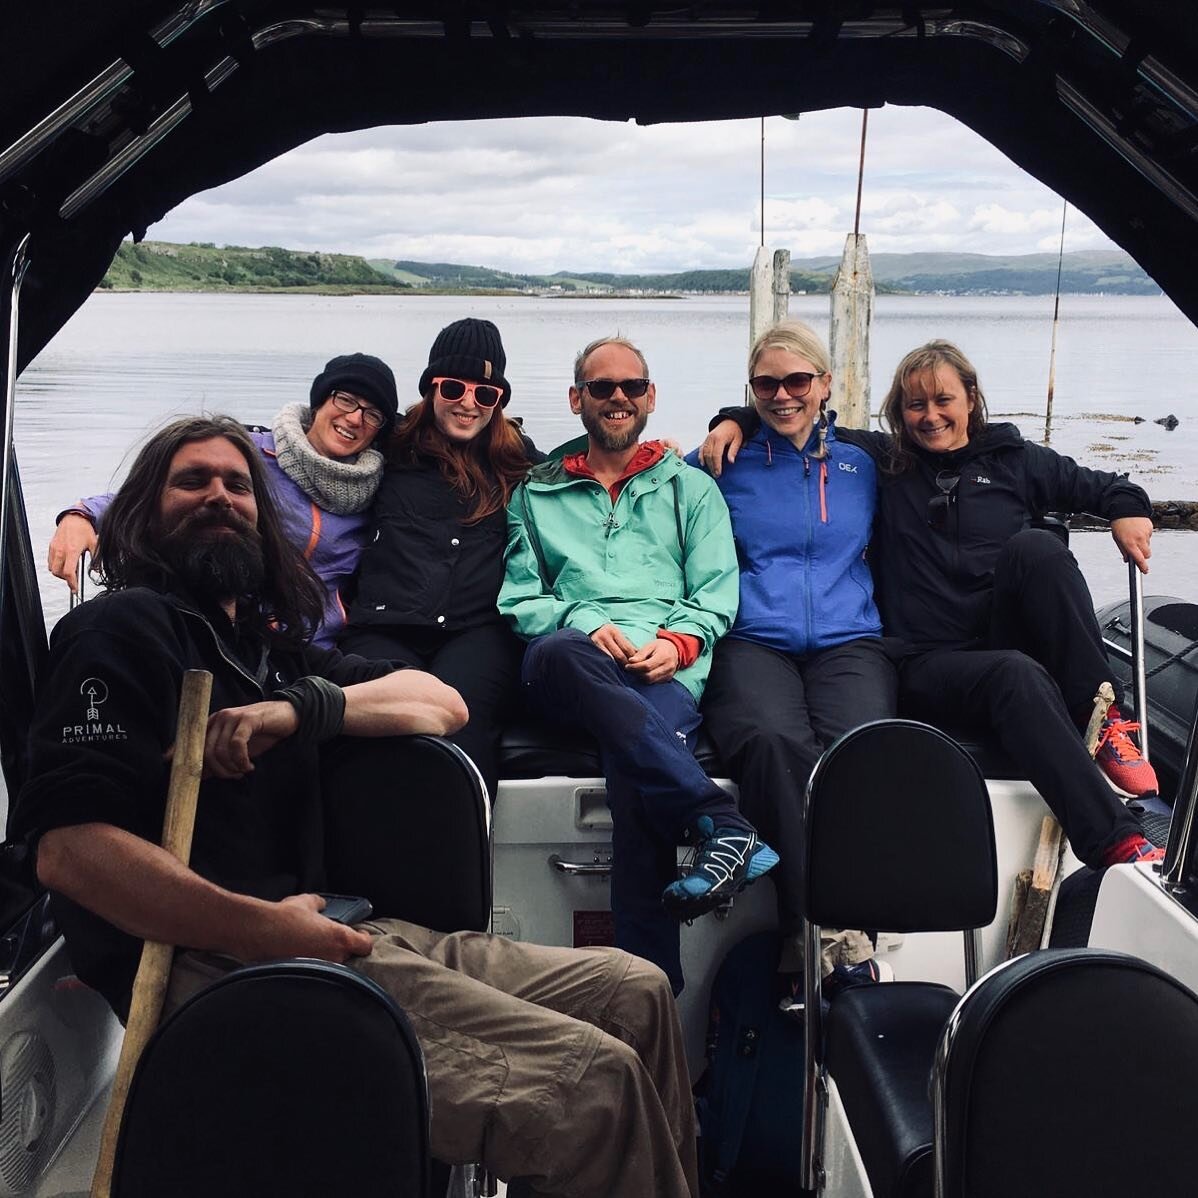 Next job today - #watertaxi to collect the castaways on #weecumbrae from their @primal_adventures_scotland weekend! Look at those happy faces - safe to say they had a great weekend! #adventuretourism #watertaxi #bushcraft #wilding #localinvite